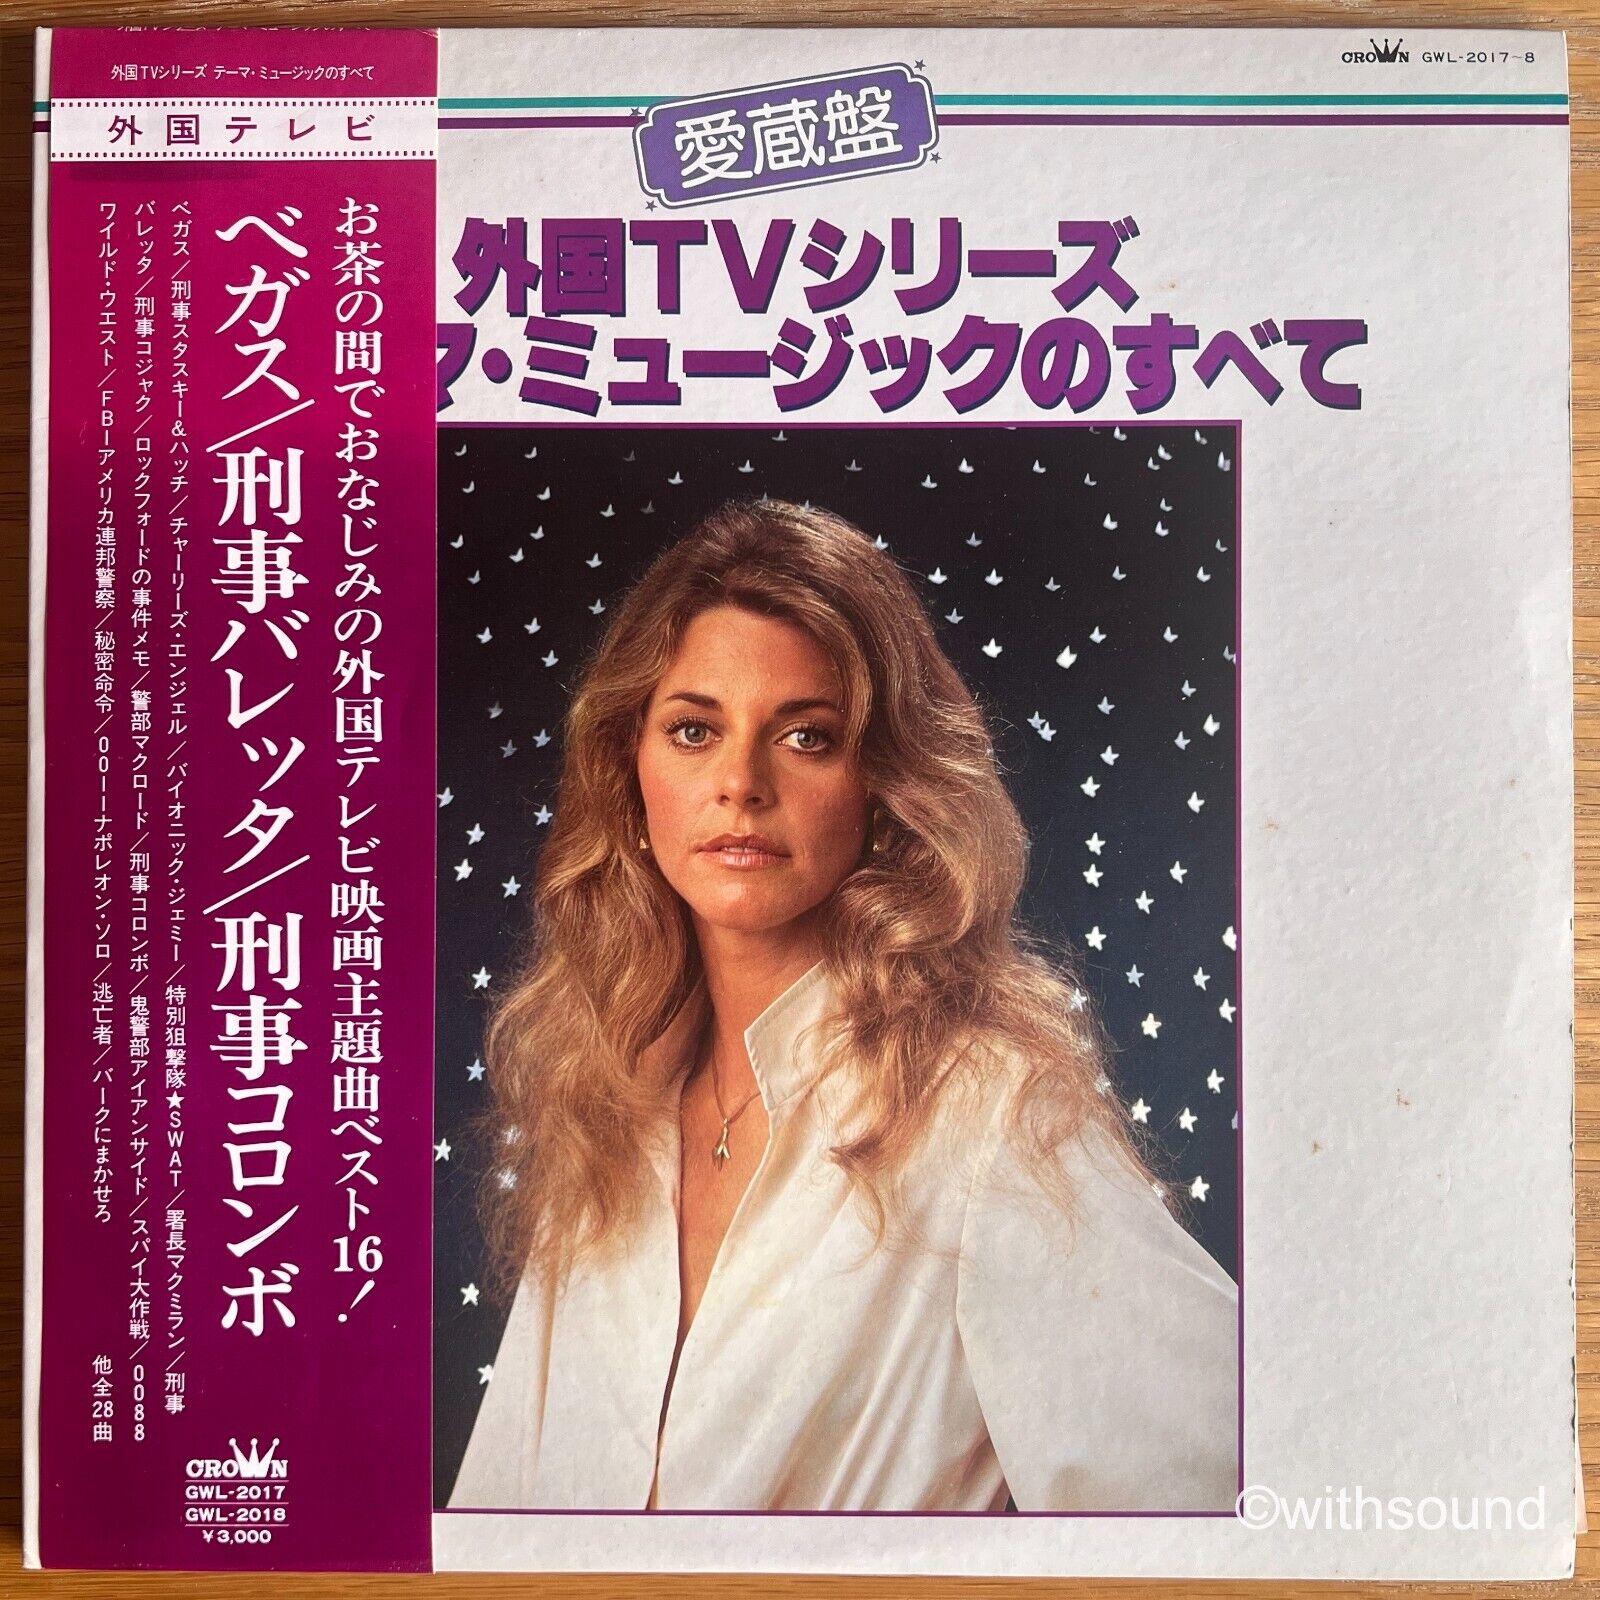 MOVIELAND EXPRESS Foreign TV Series Theme JAPAN DBL LP JAZZ FUNK LINDSAY WAGNER